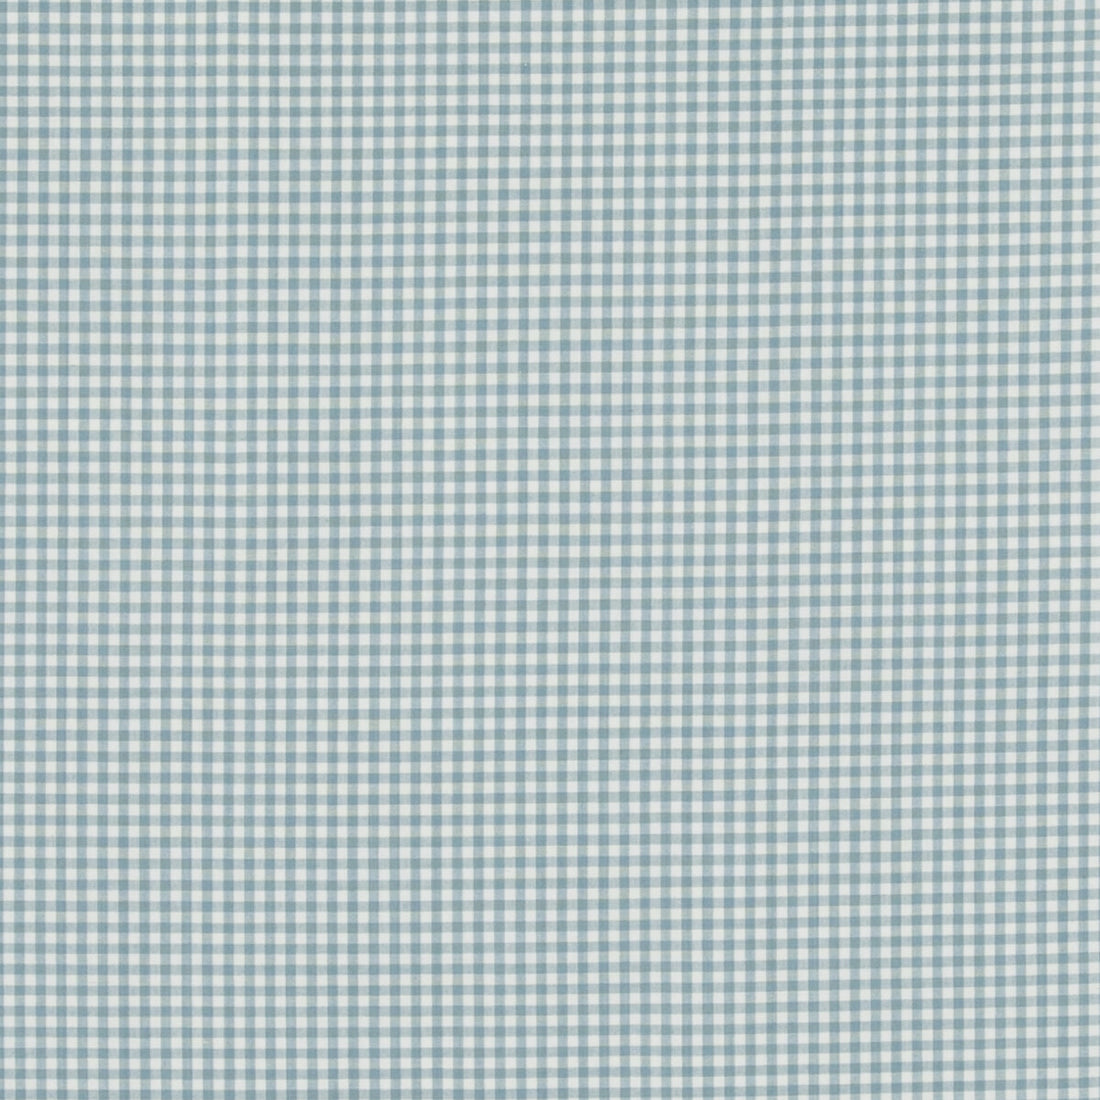 Sherborne Gingham fabric in aqua color - pattern PF50506.725.0 - by Baker Lifestyle in the Bridport collection